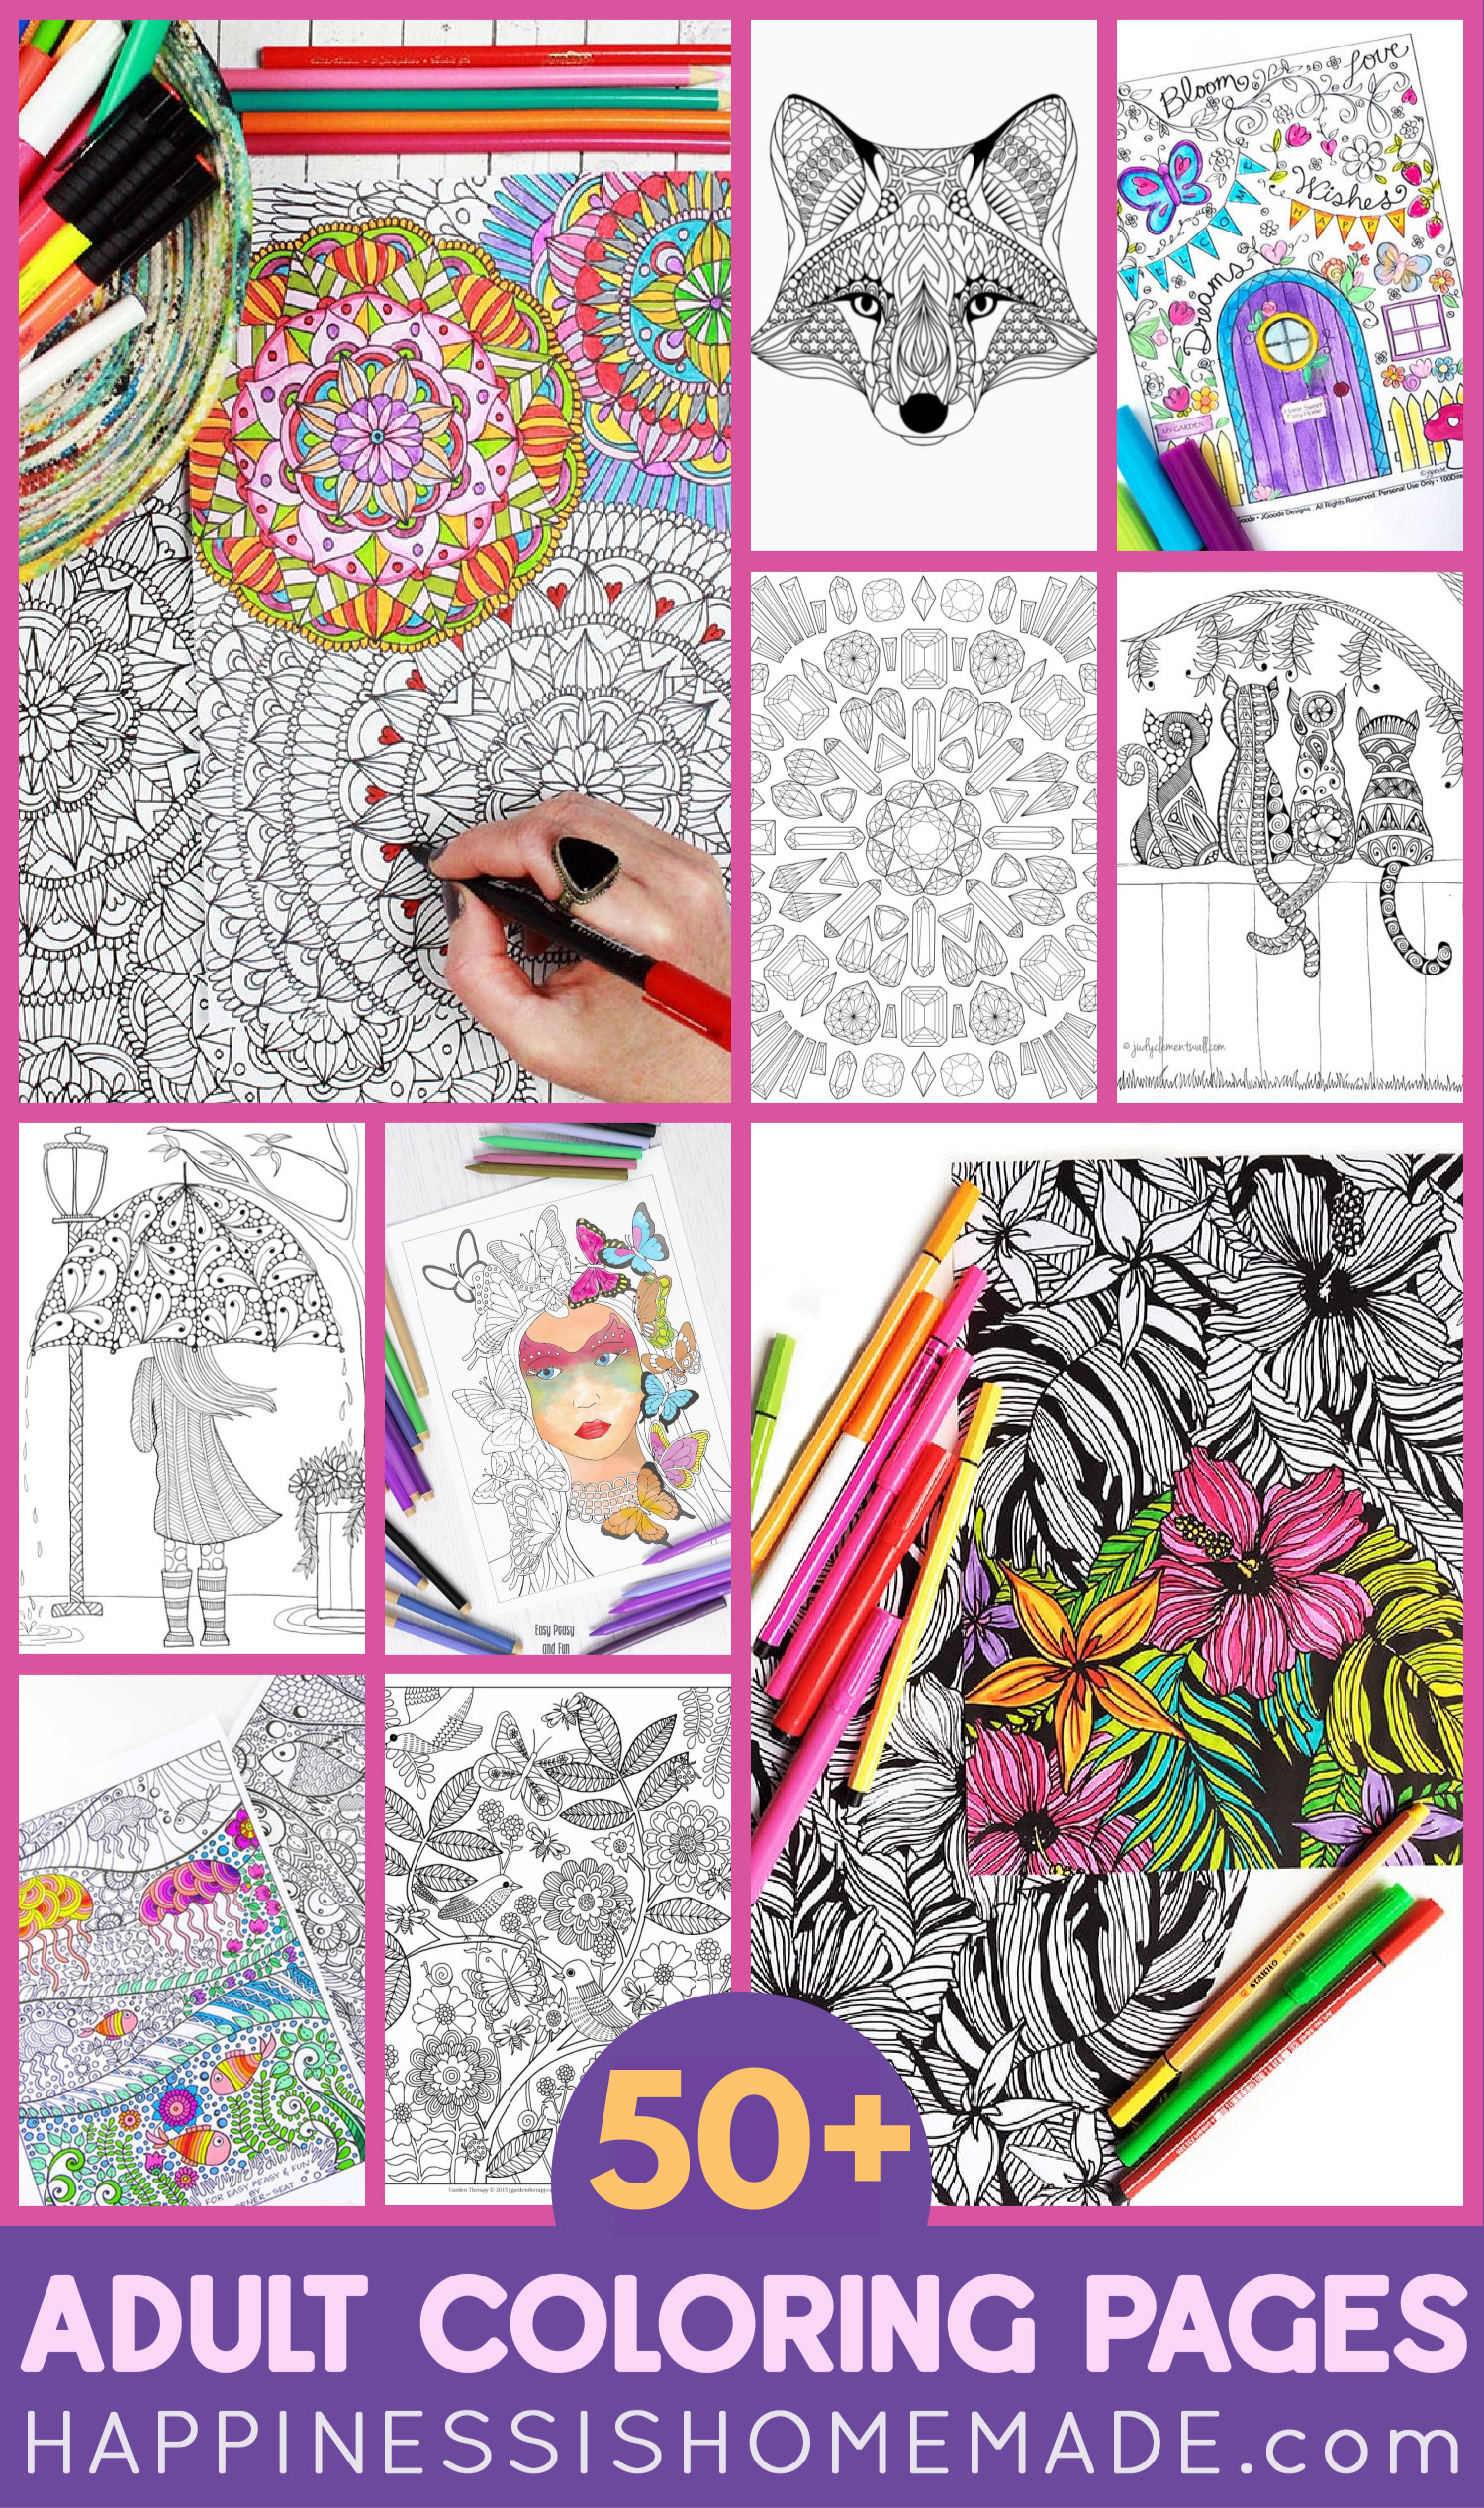 50+ Adult Coloring Pages